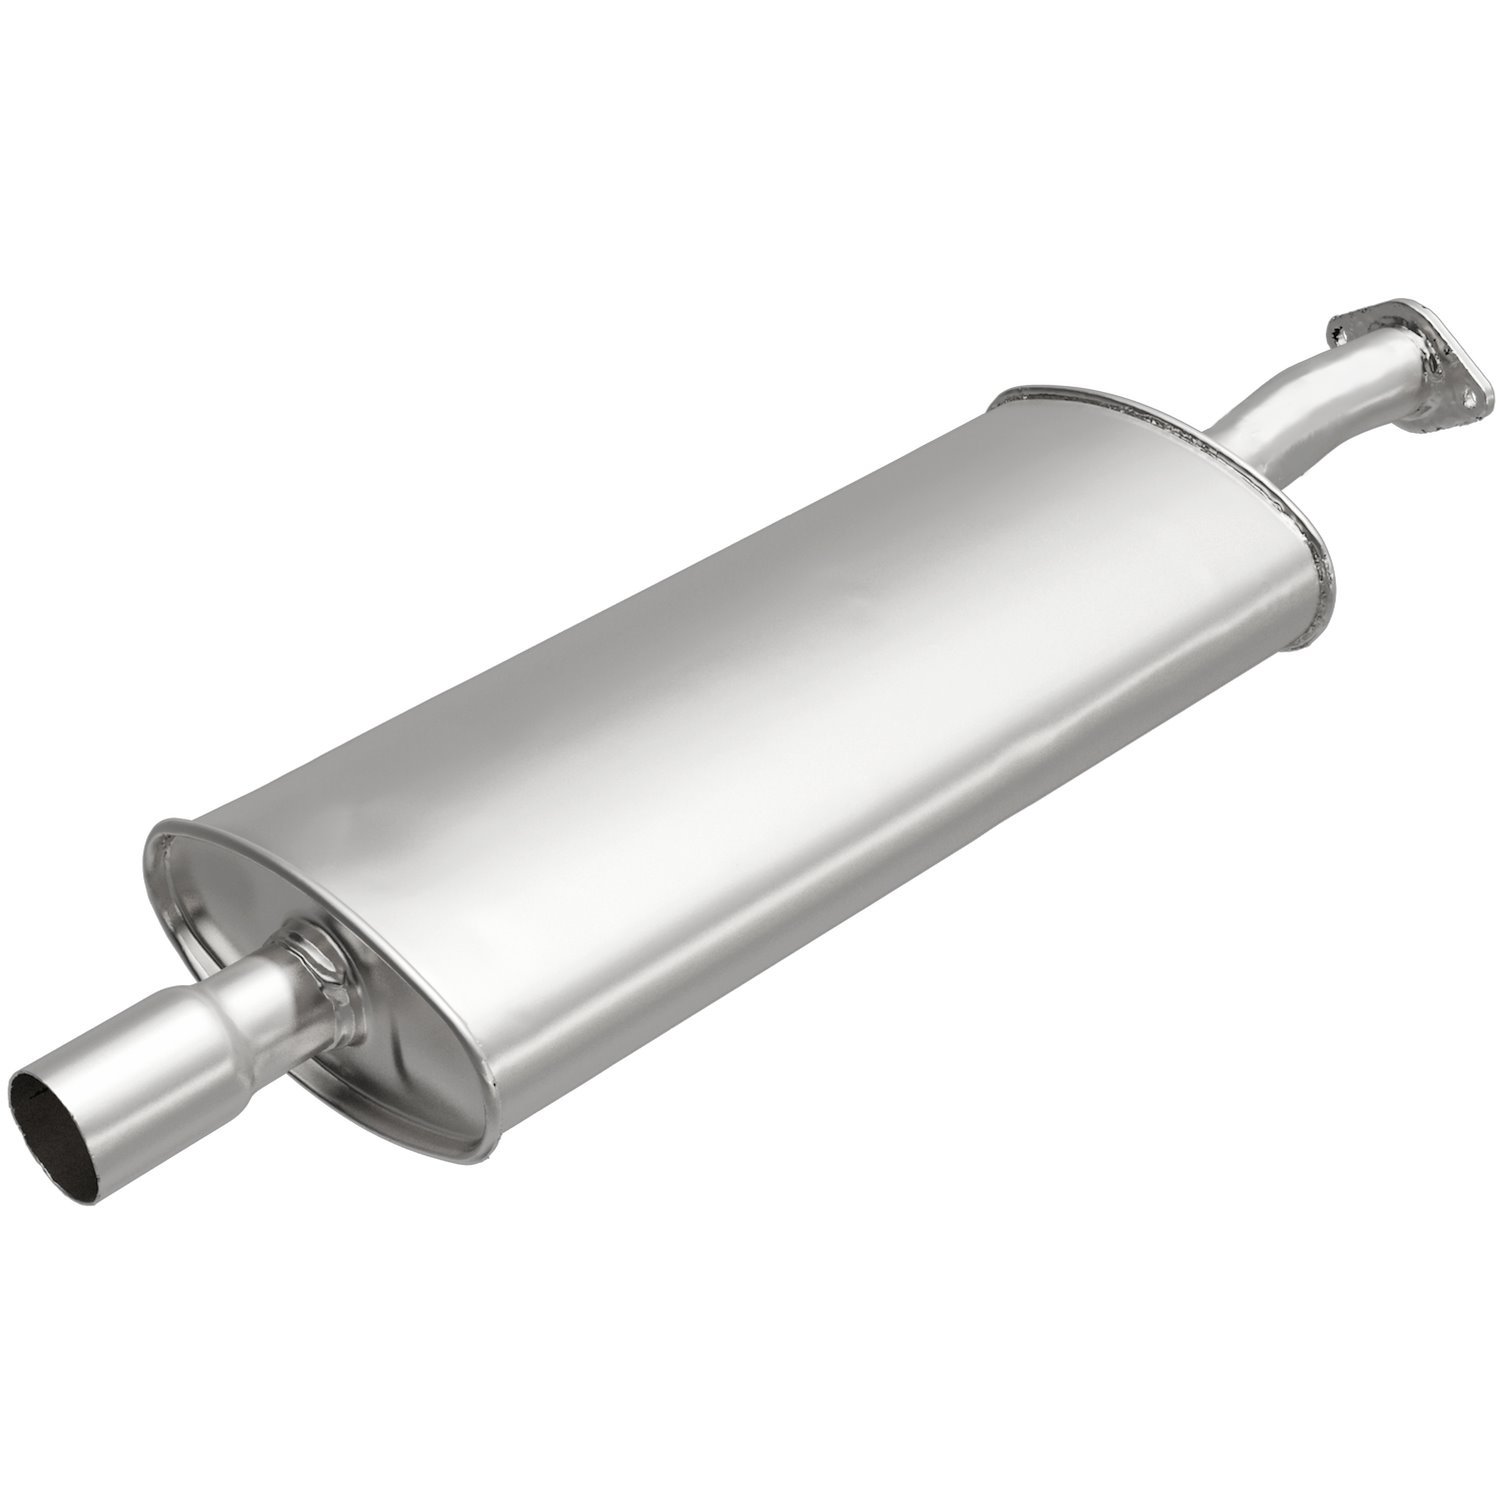 Direct-Fit Exhaust Muffler, 2005-2008 Ford Escape, Mercury Mariner/Tribute